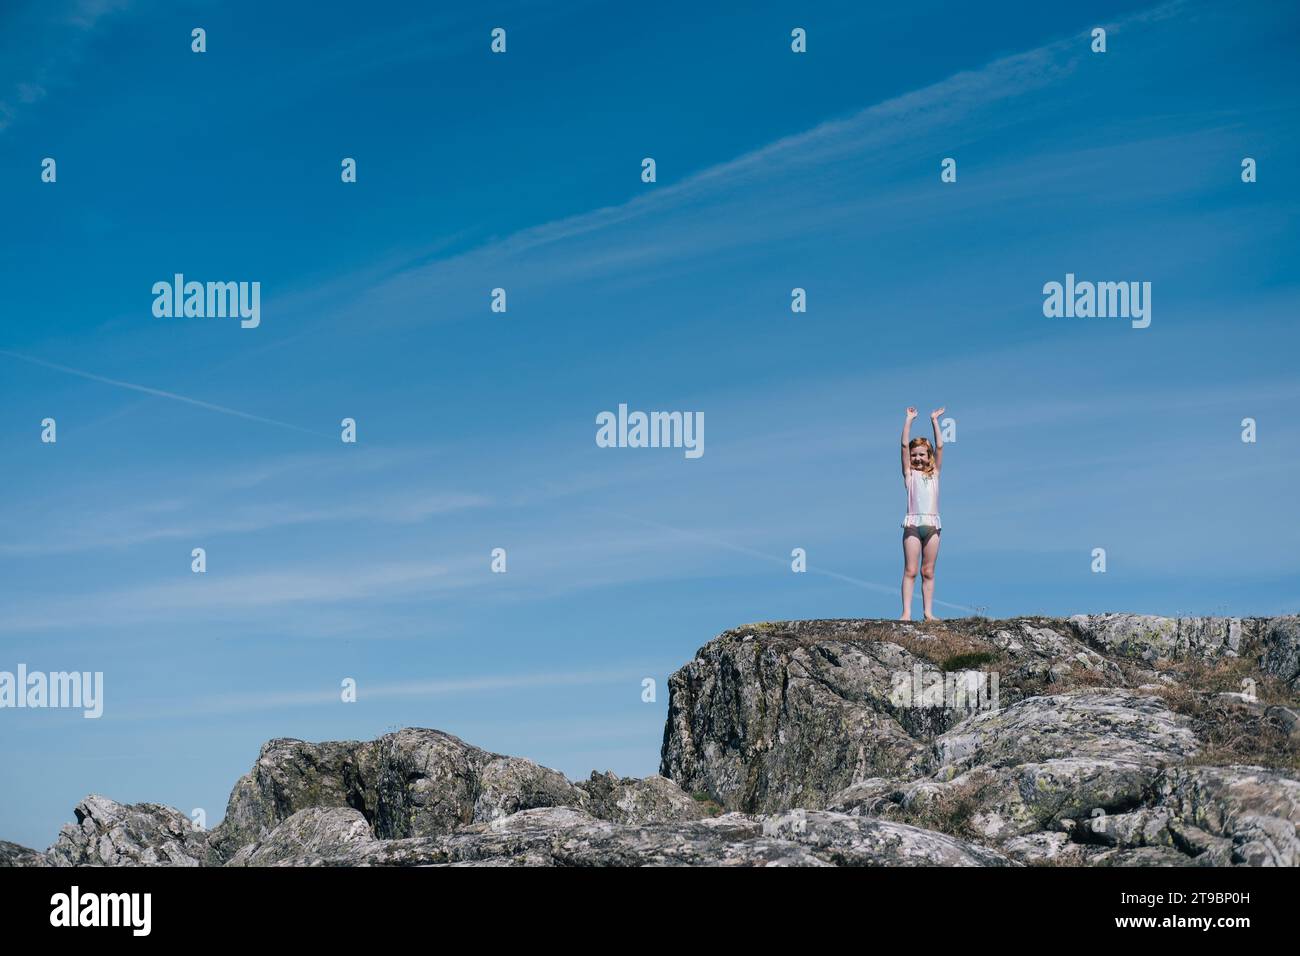 Girl standing on rock formation against blue sky on sunny day Stock Photo